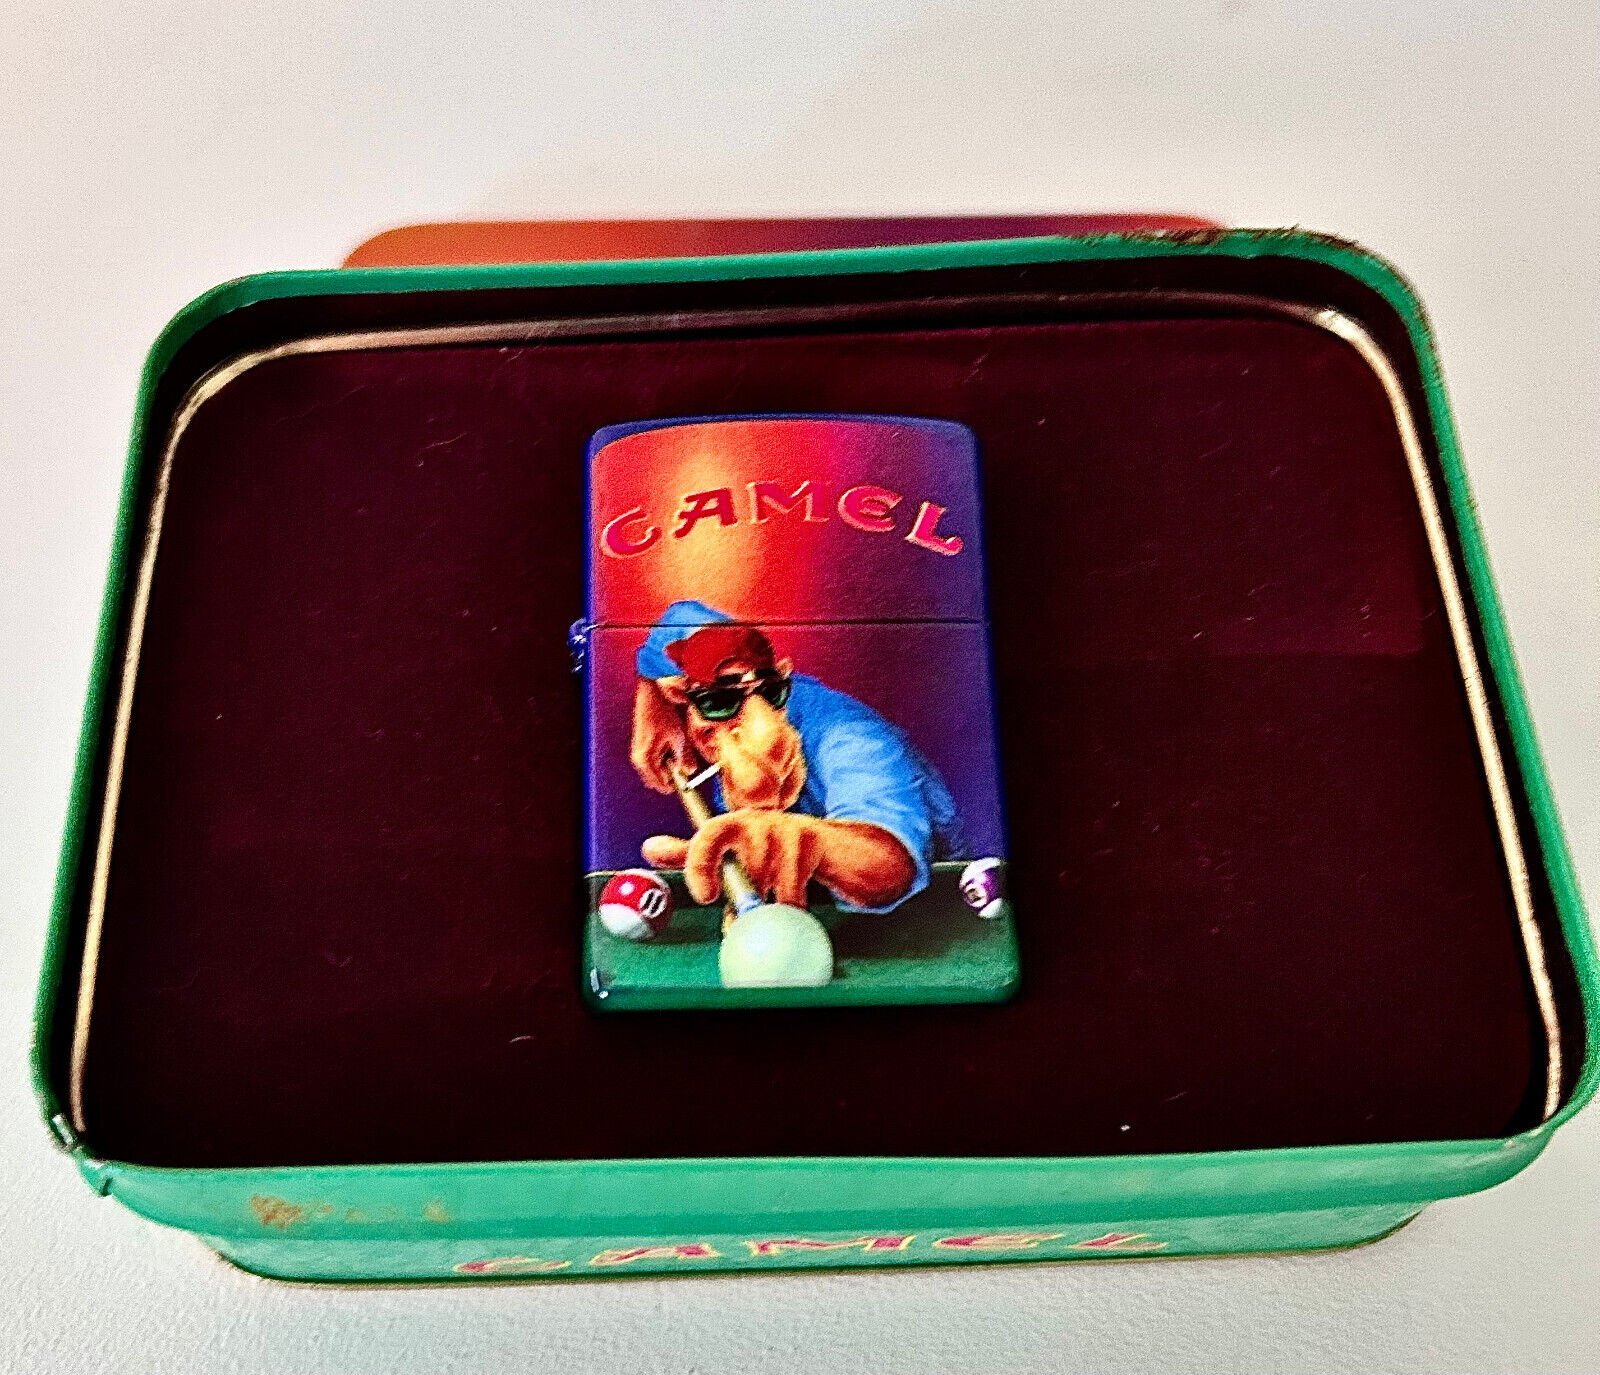 Camel Joe Lighter Playing Pool/Billiards with Tin,  Lighter Unfired & Sealed